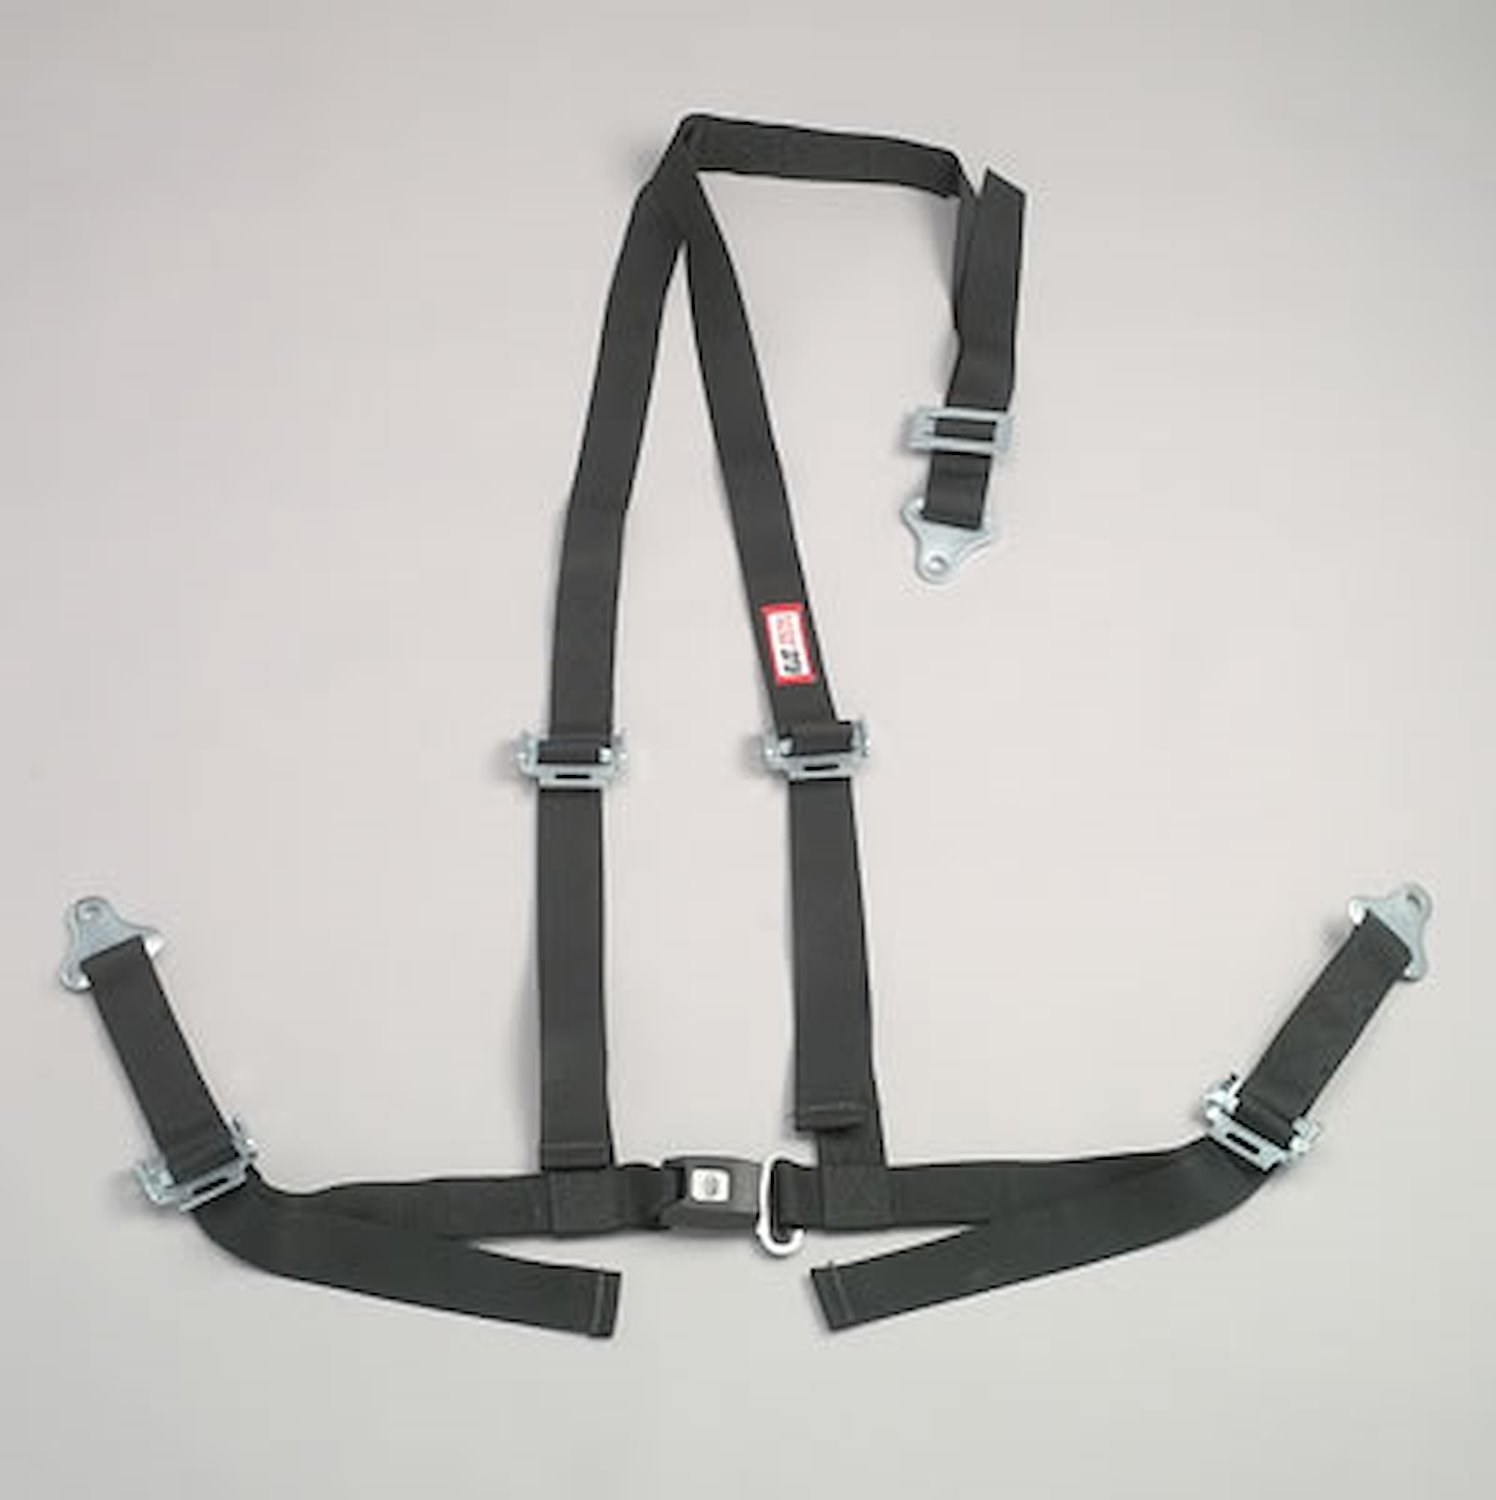 NON-SFI B&T HARNESS 2 PULL UP Lap Belt SNAP 2 S. H. Individual ROLL BAR Mount WRAP/SNAP w/STERNUM STRAP ORANGE